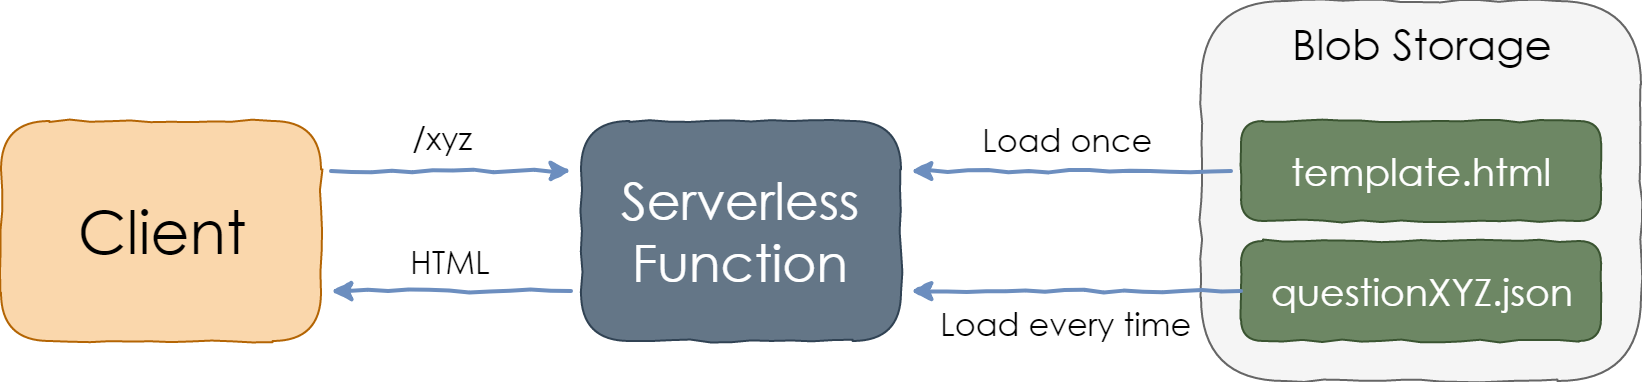 Serving StackOverflow Traffic from a Serverless Function